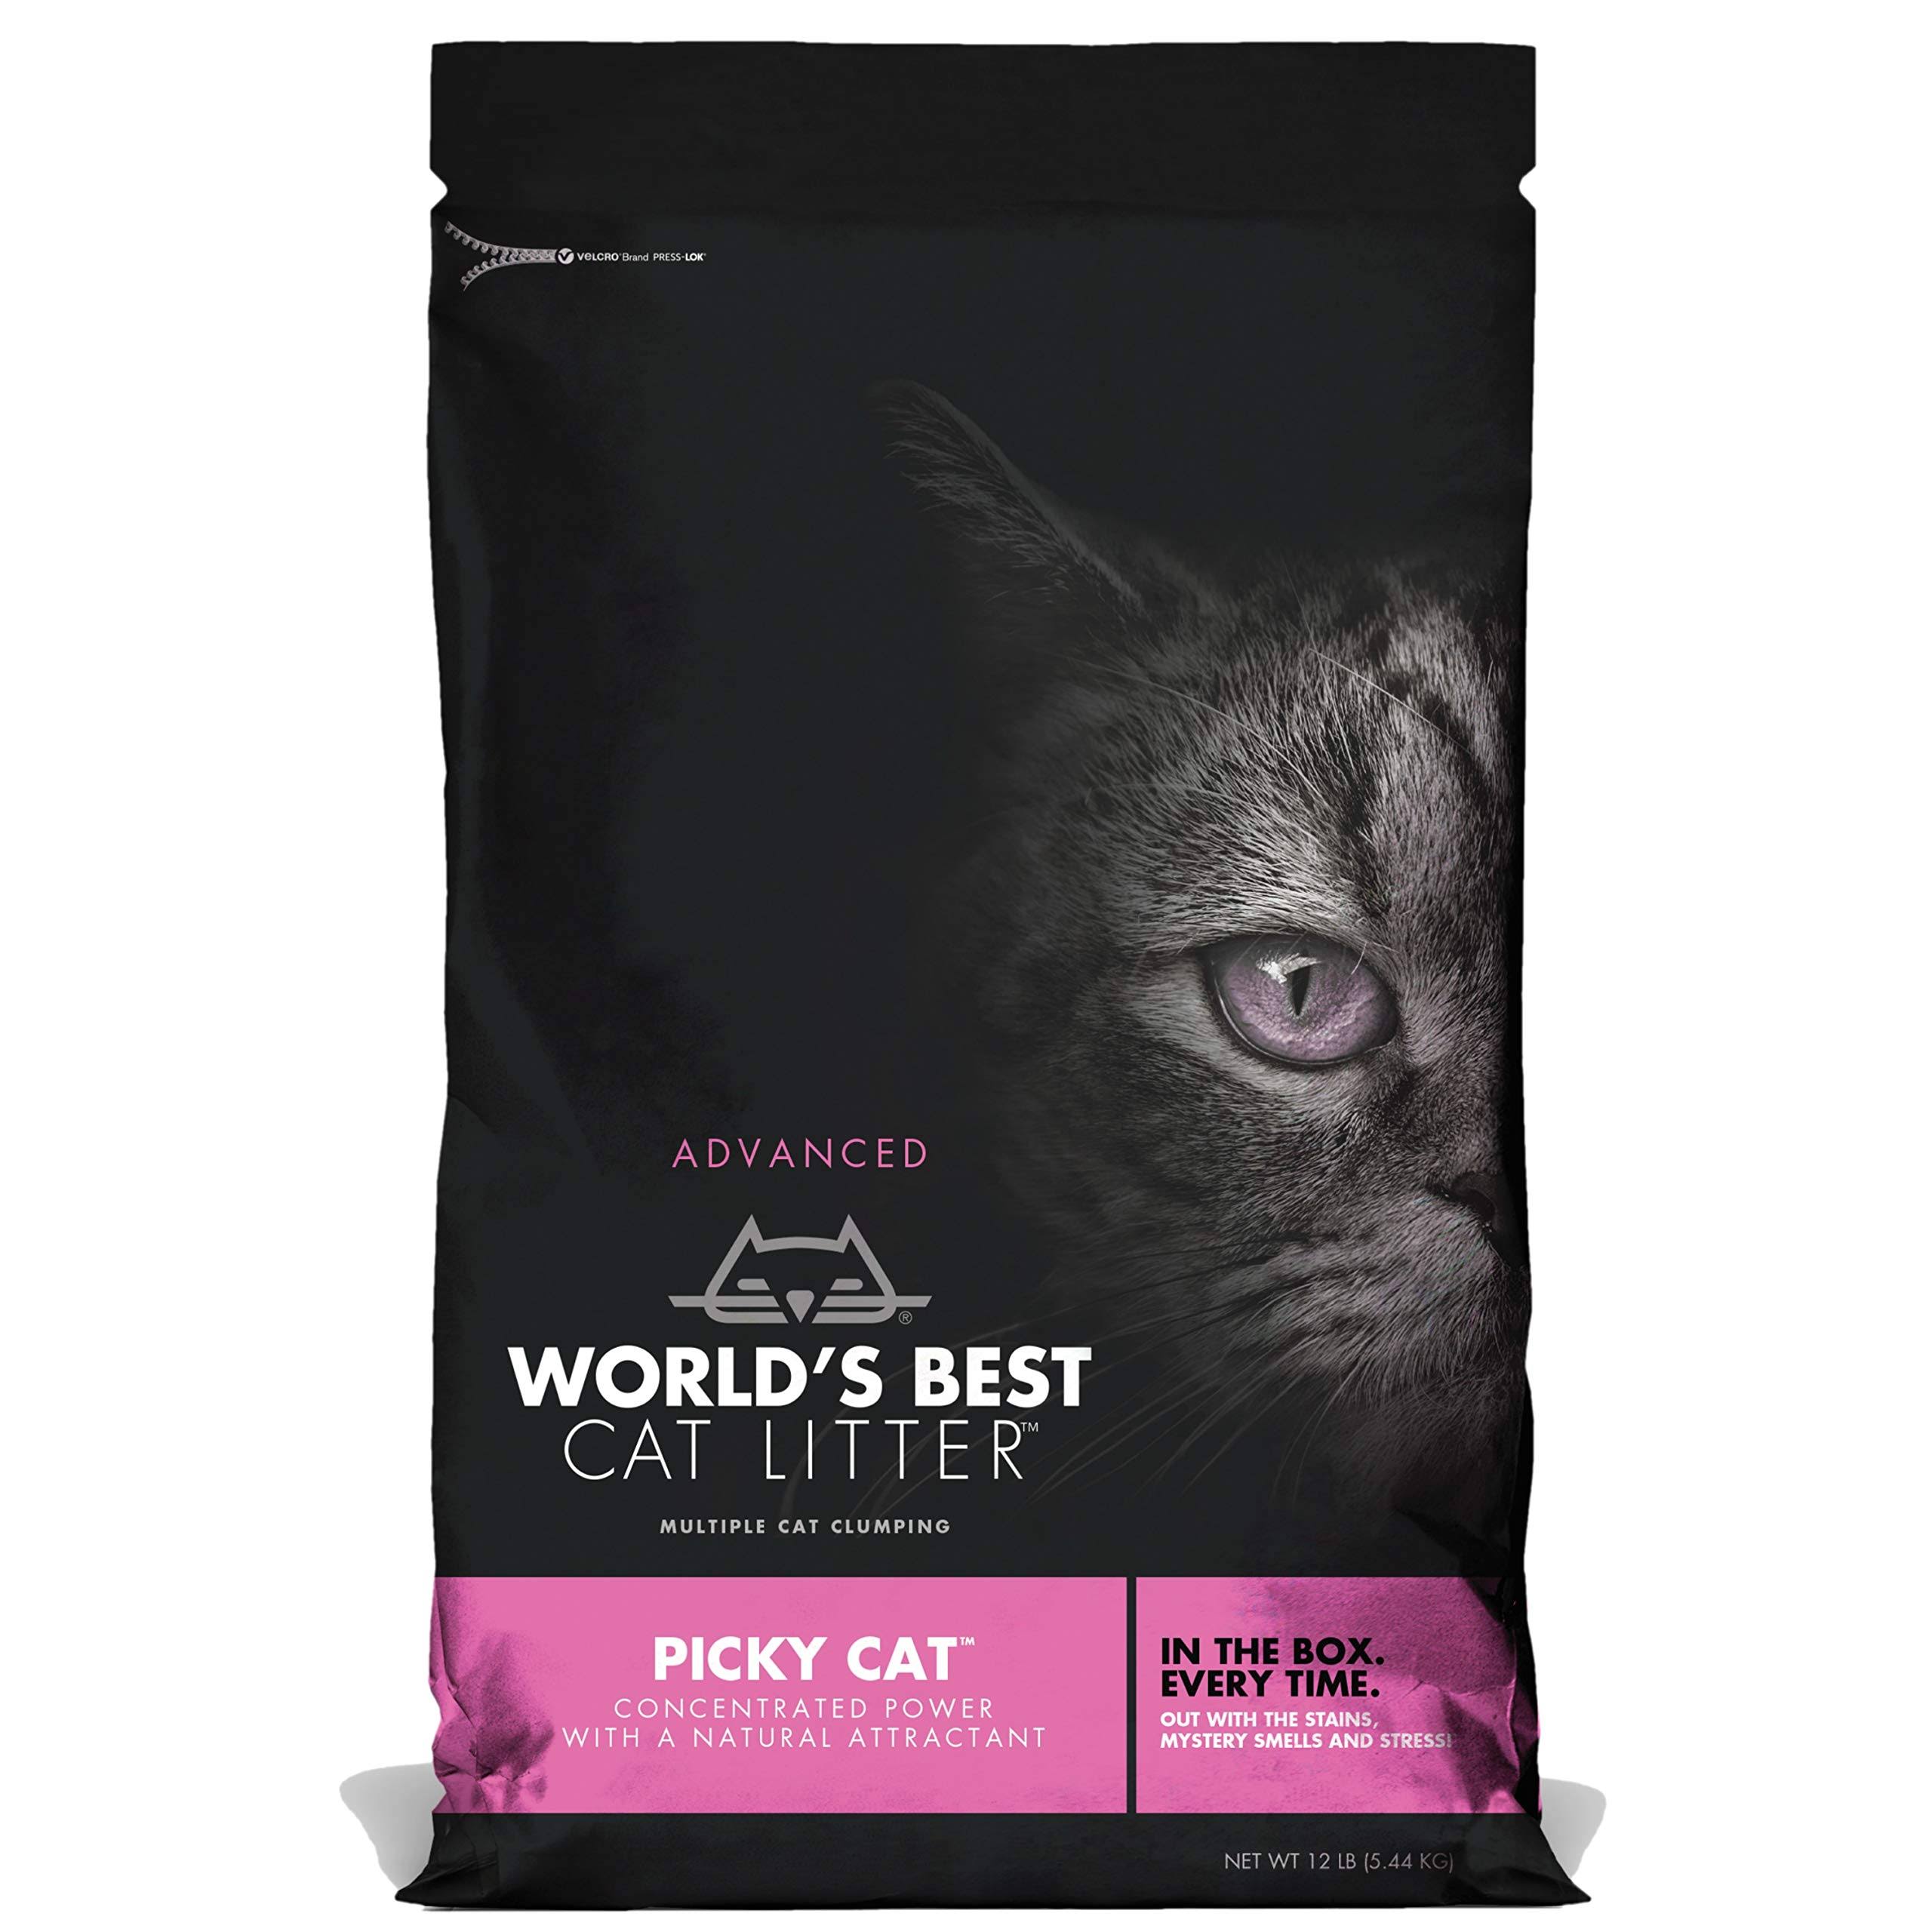 World's Best Picky Cat Advanced Litter For Cats 12 Pound